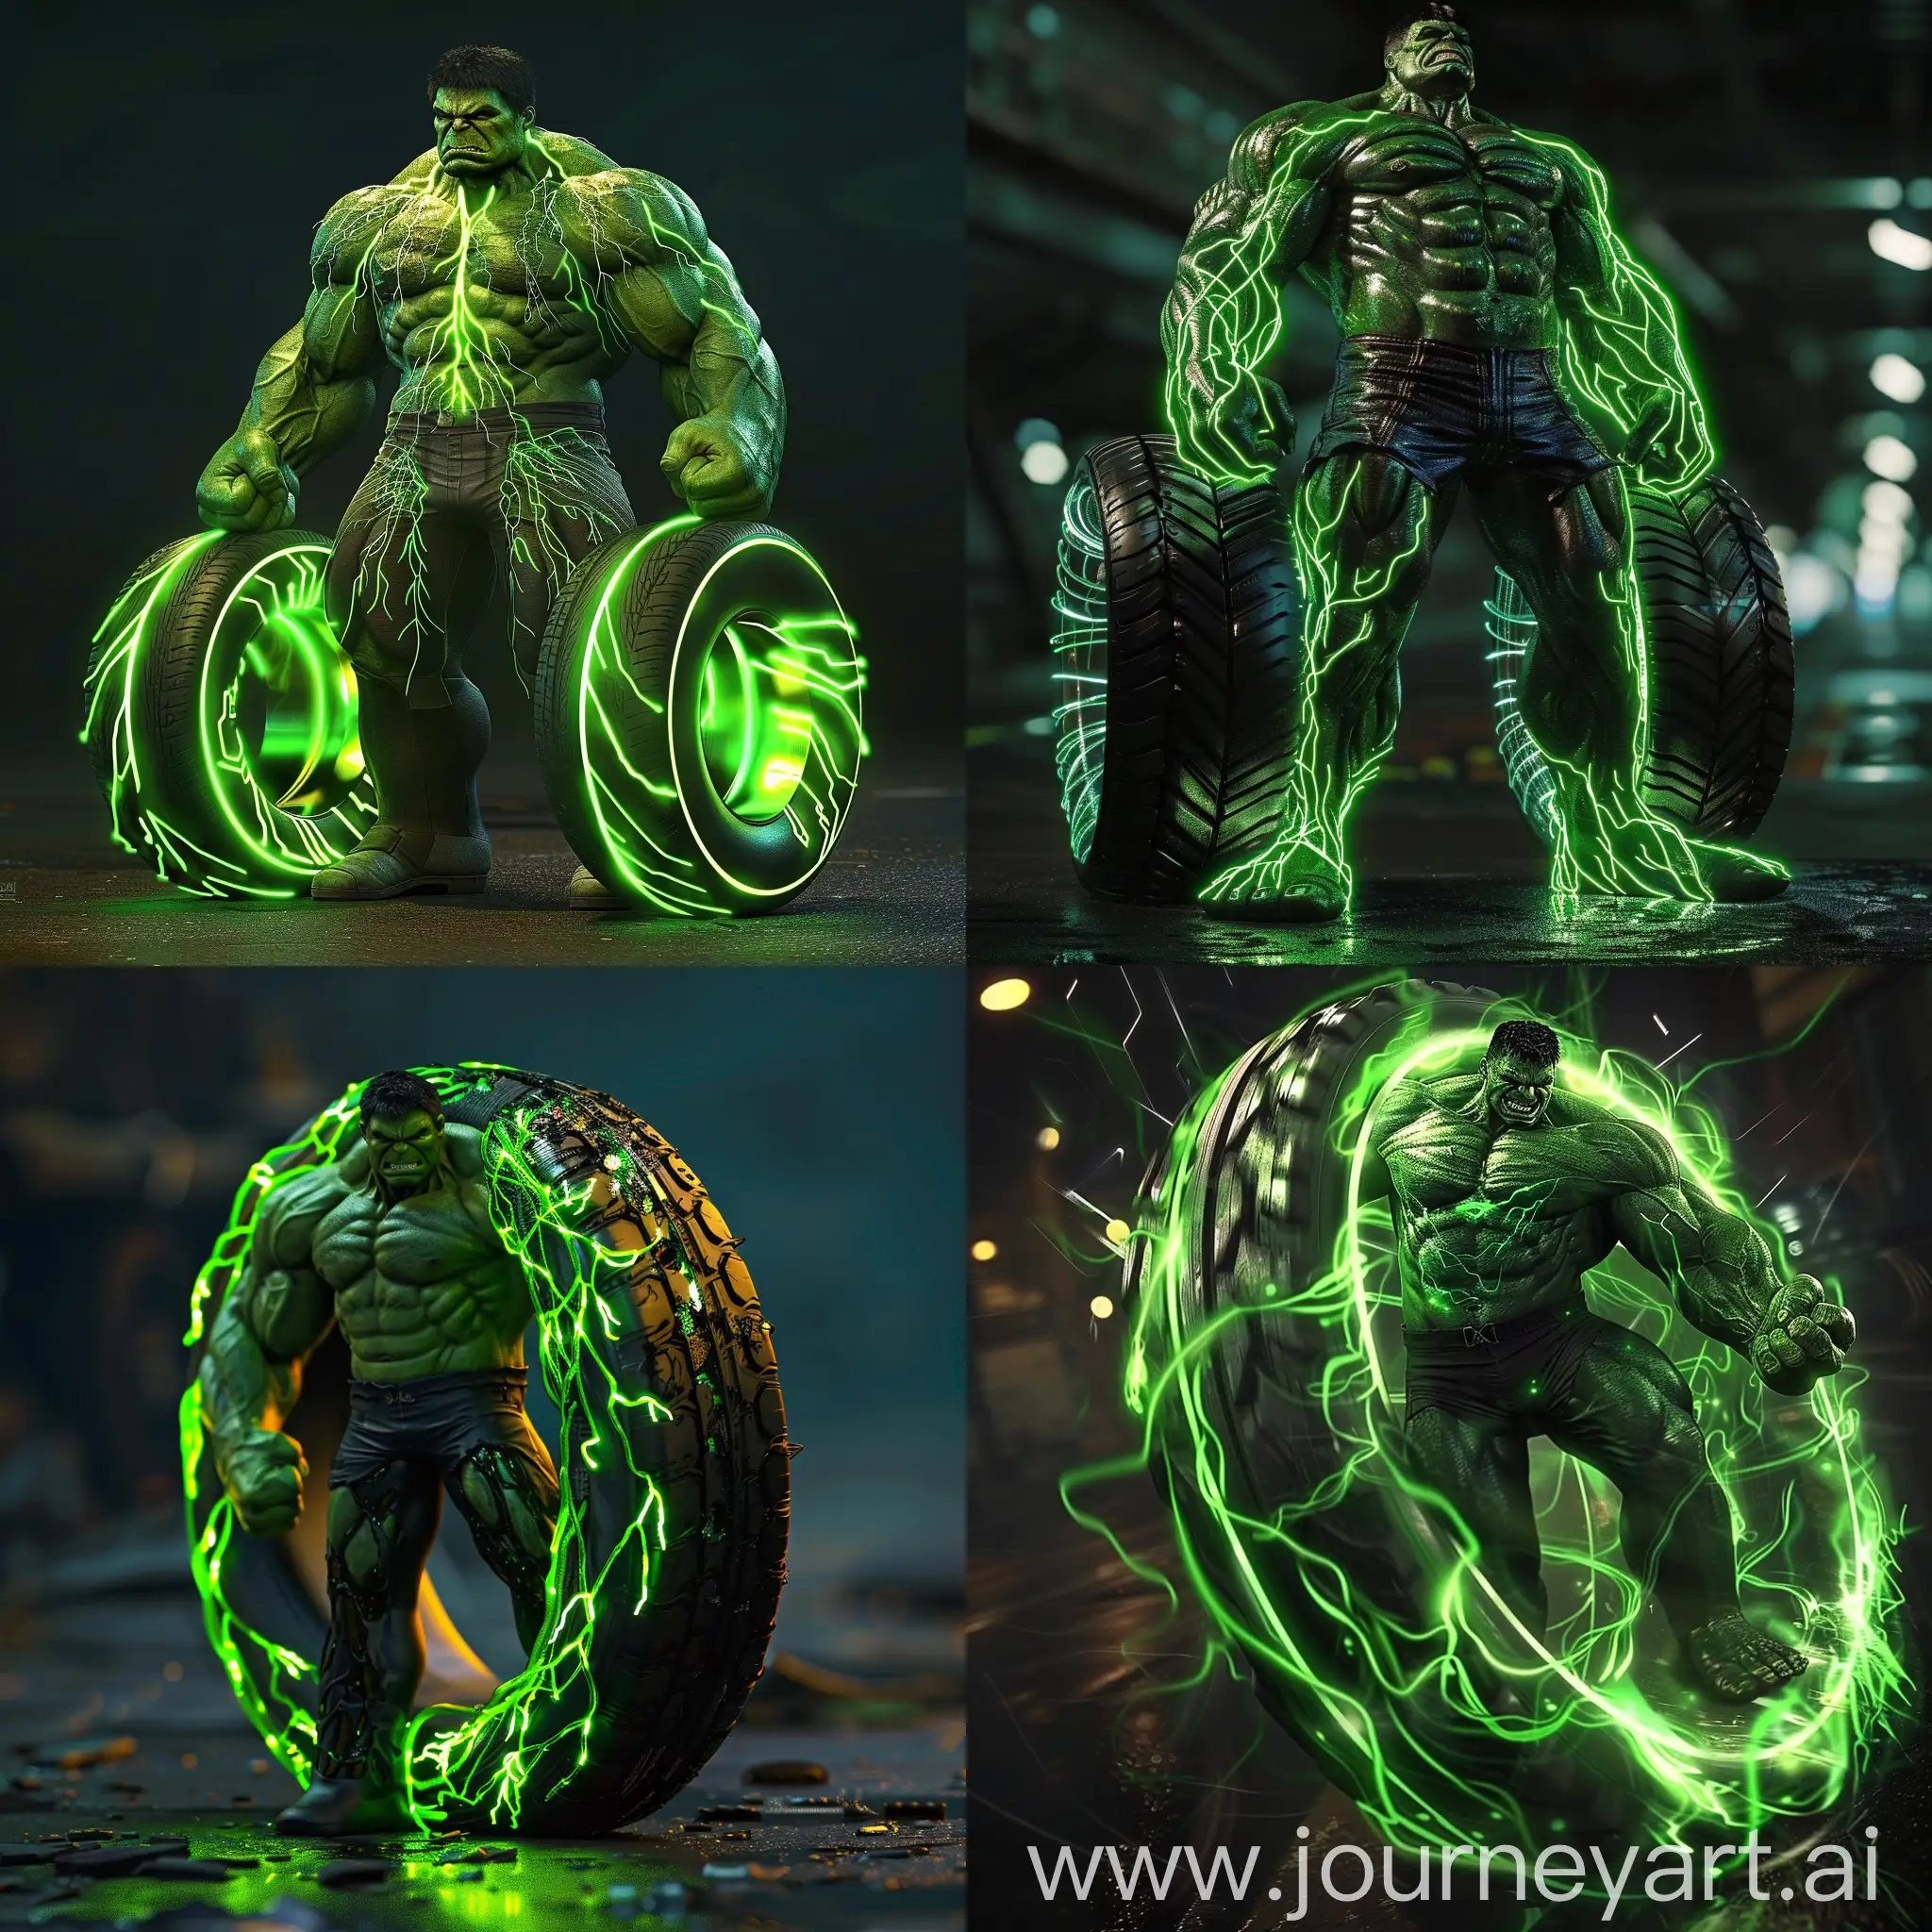 Green colour tyres Should show in tyre veins as they emerge in Hulk's body. Energy of shiny green colour like a neon light-emitting Think beyond realistic, incredible edition, only tyres images